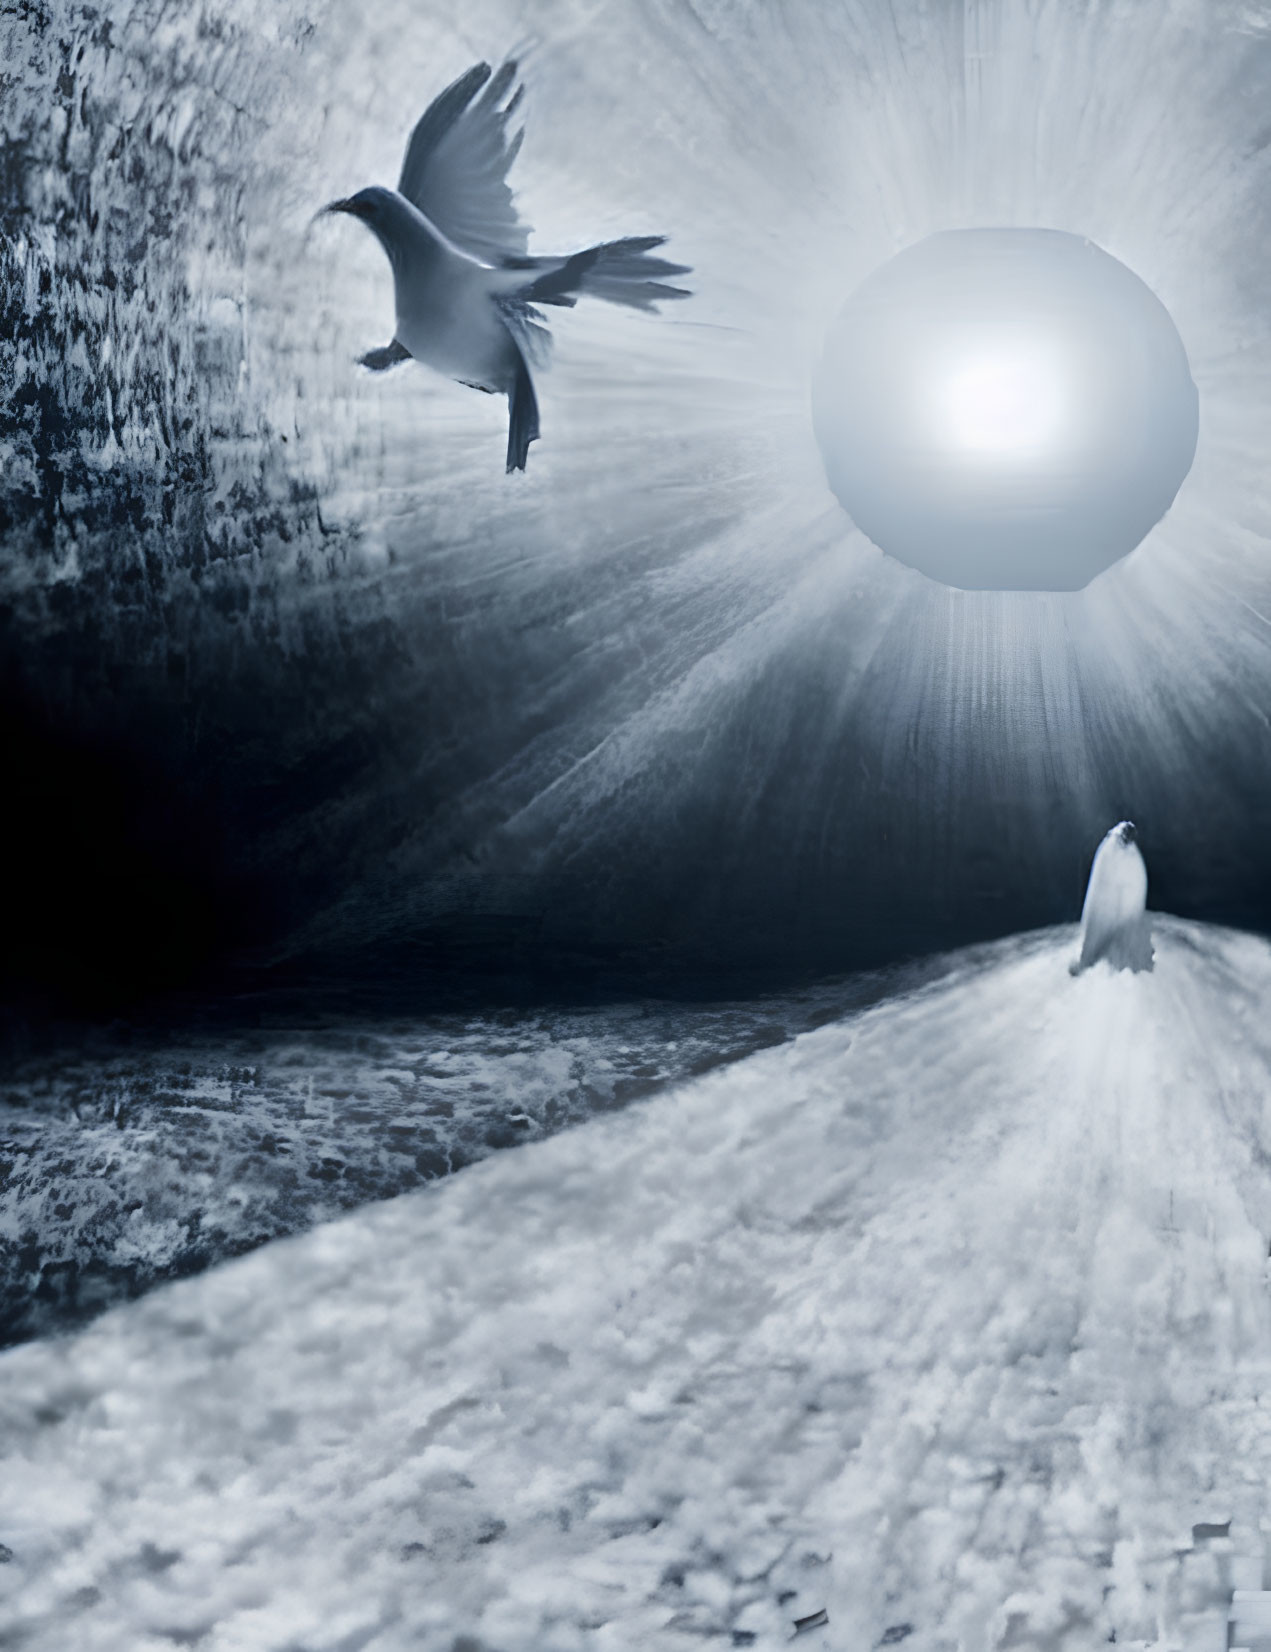 Monochrome surreal bird scene with glowing orb and textured ground